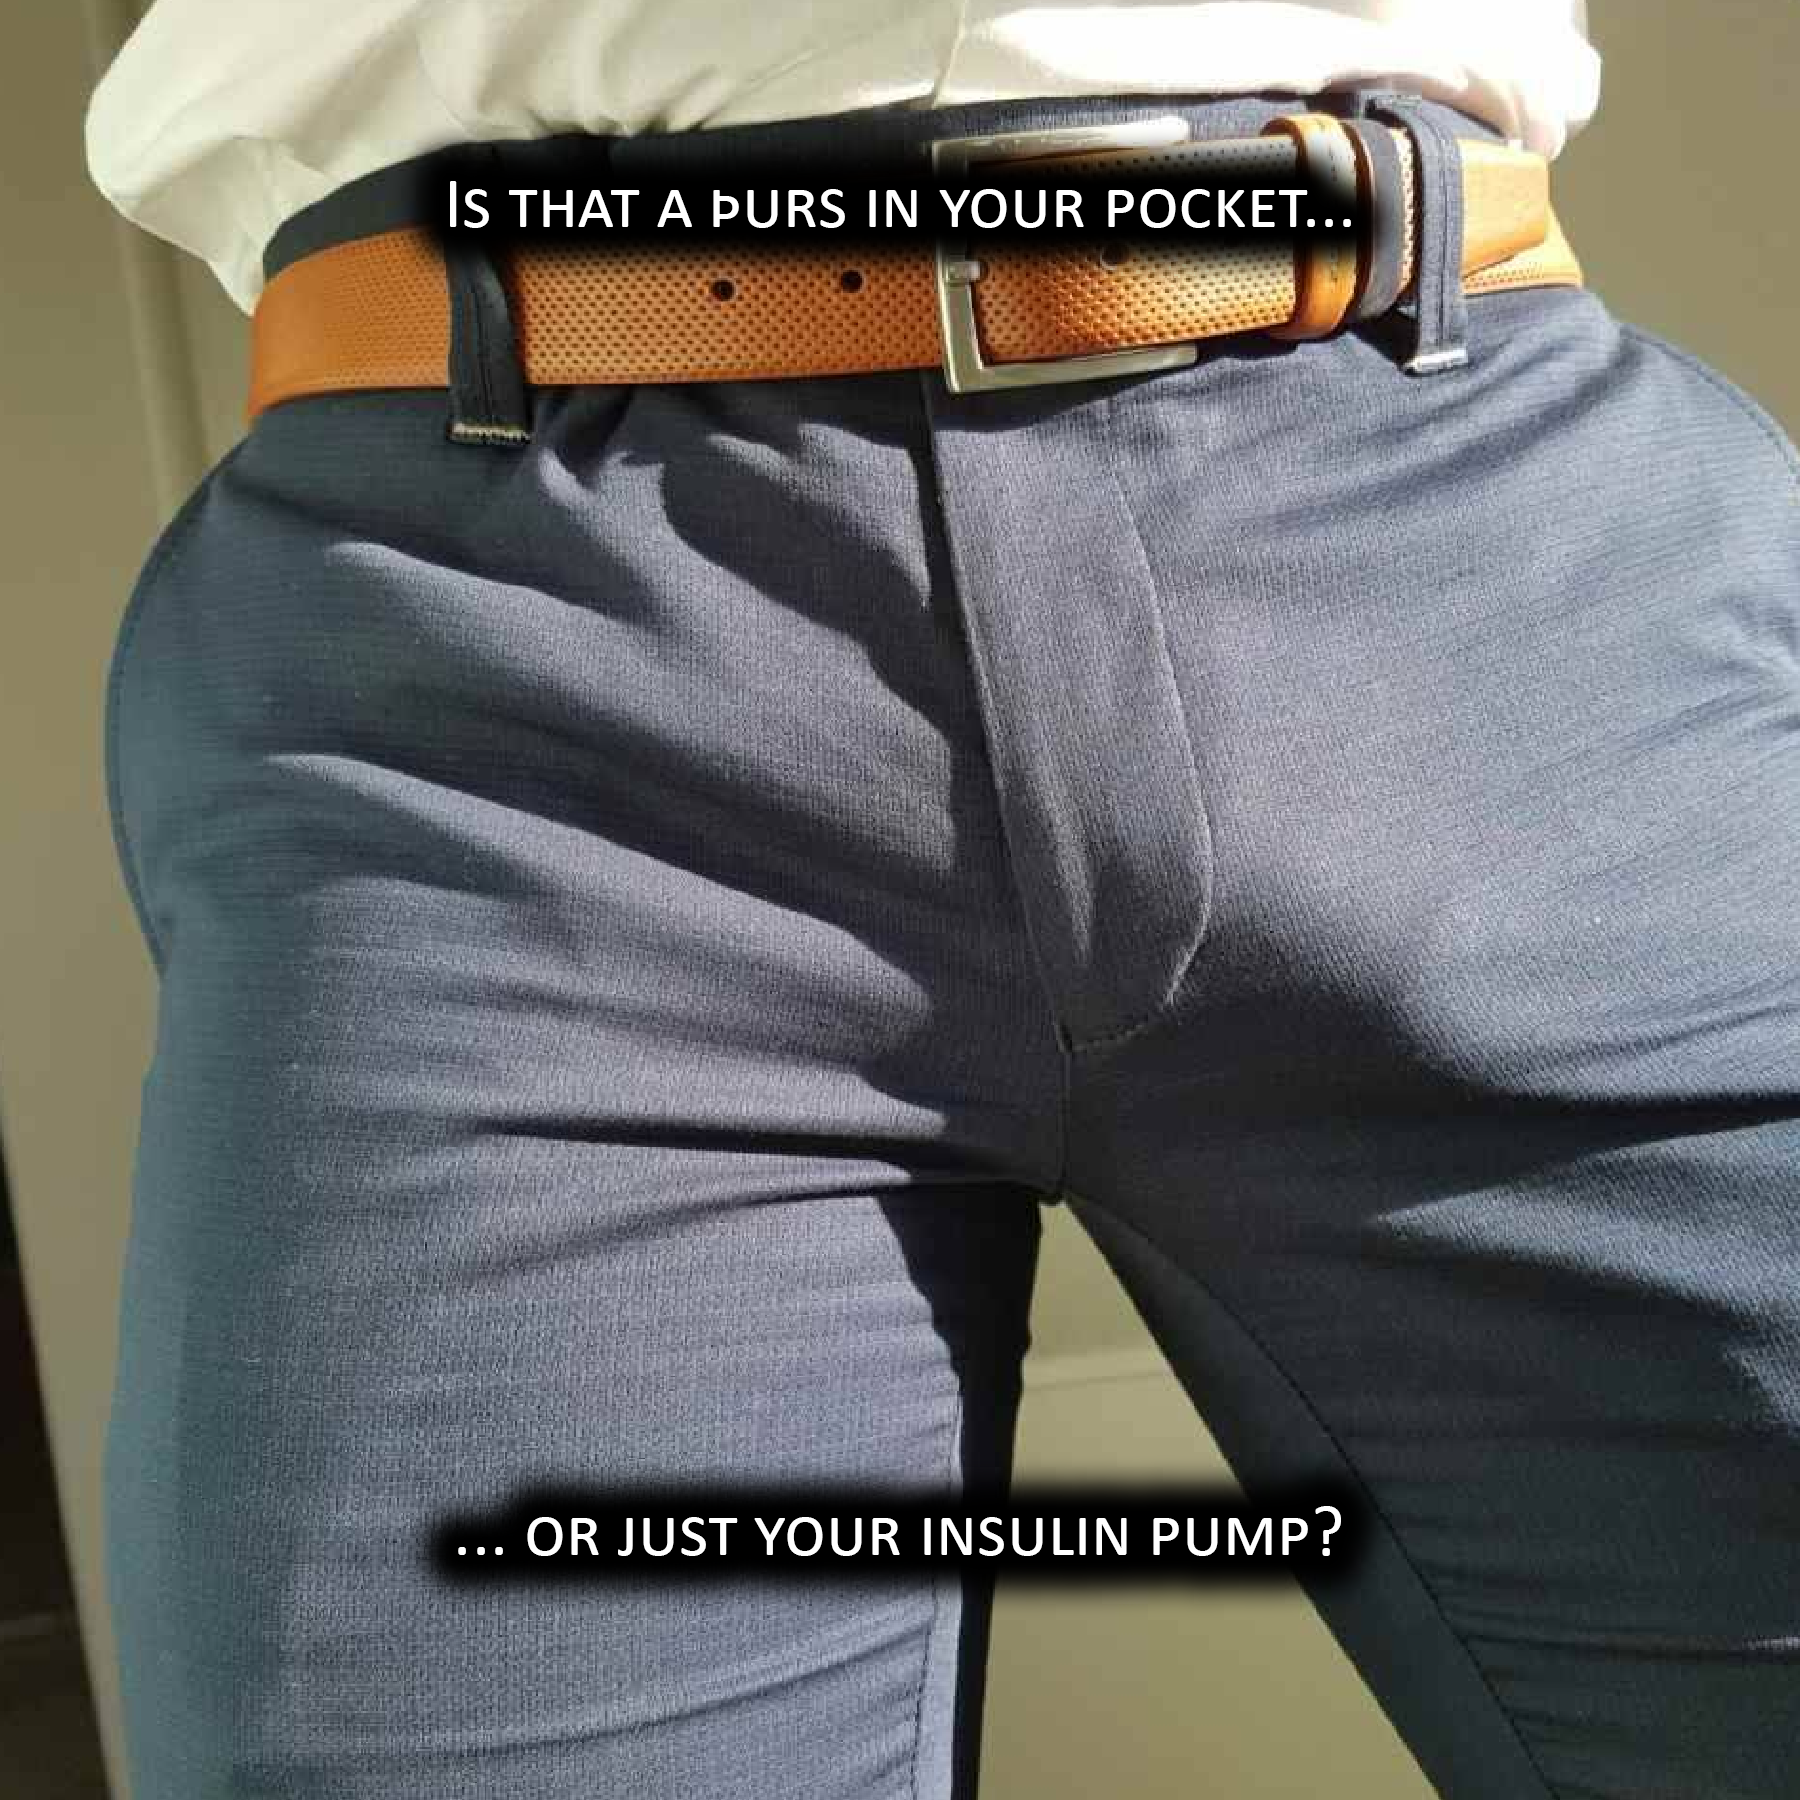 Is that a þurs in your pocket, or just your insulin pump?